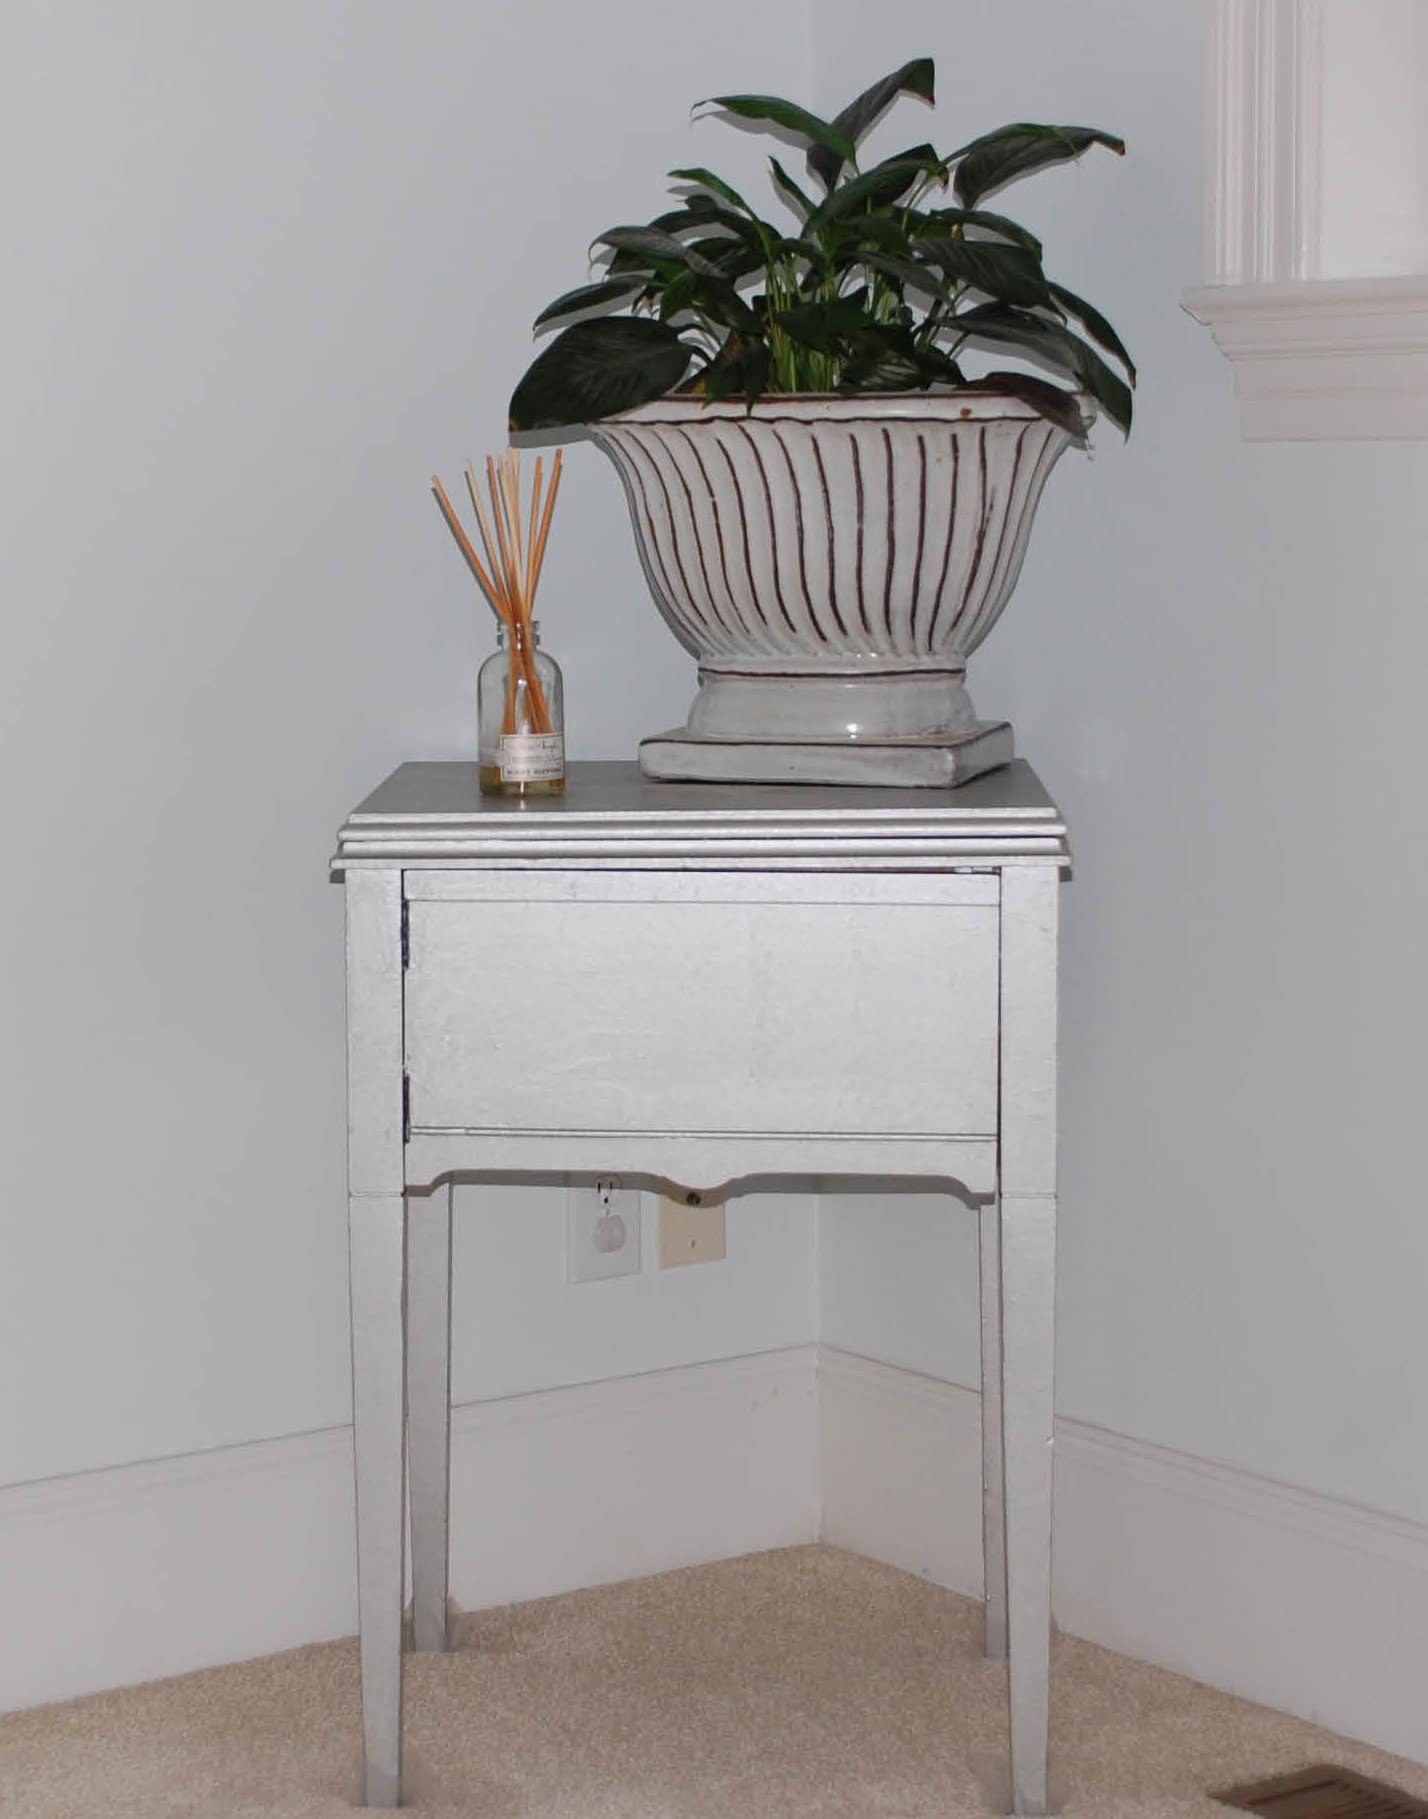 wood sewing cabinet after painting sitting in our bedroom with potted plant on top